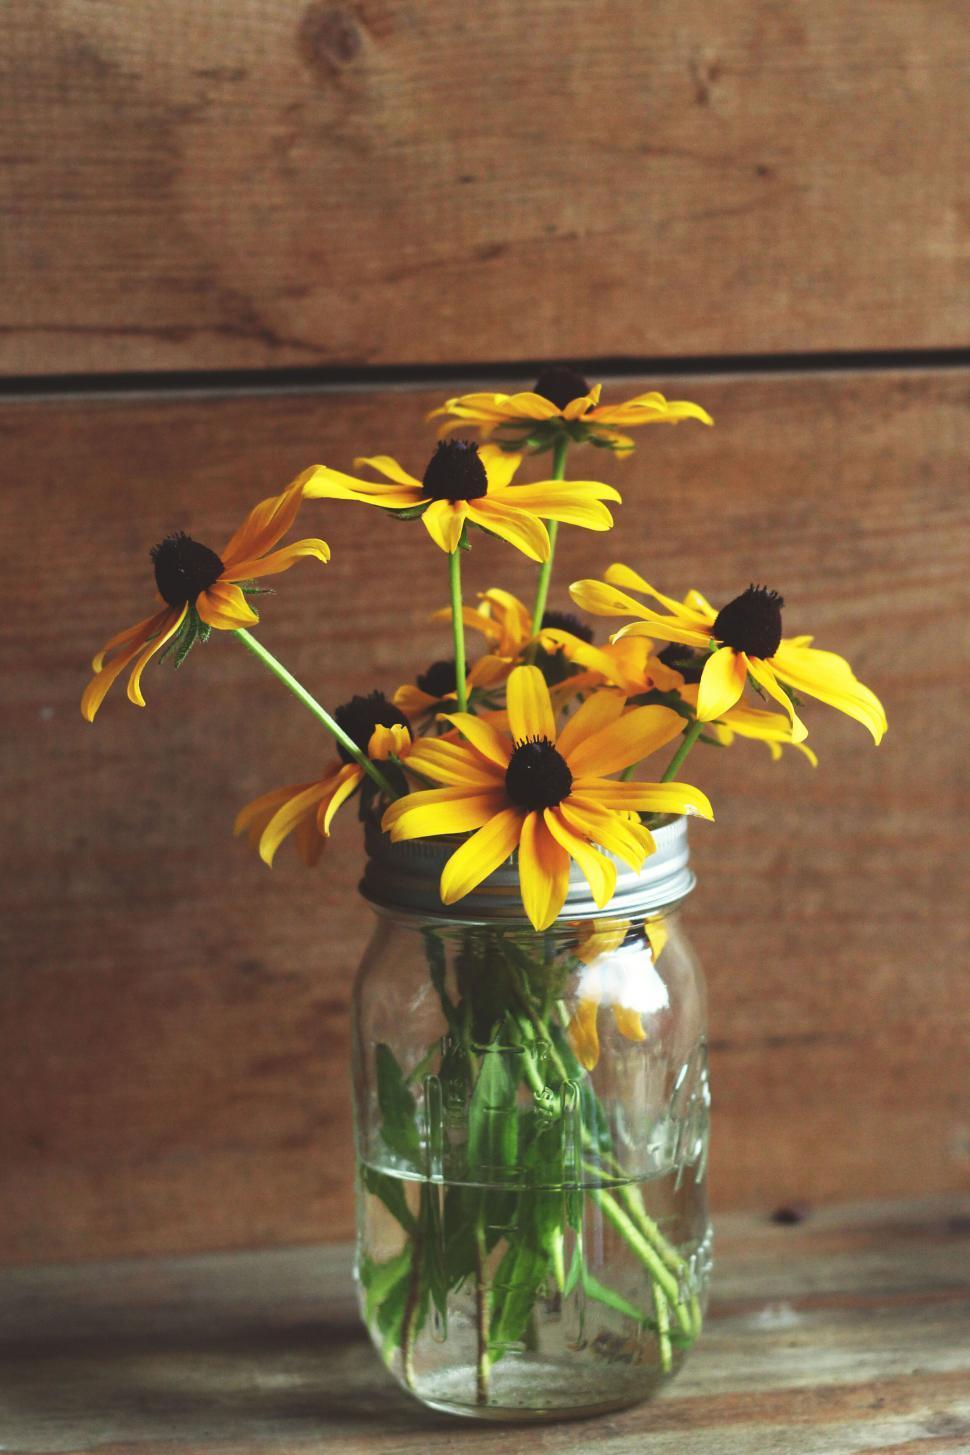 Free Image of A yellow flowers in a glass jar 